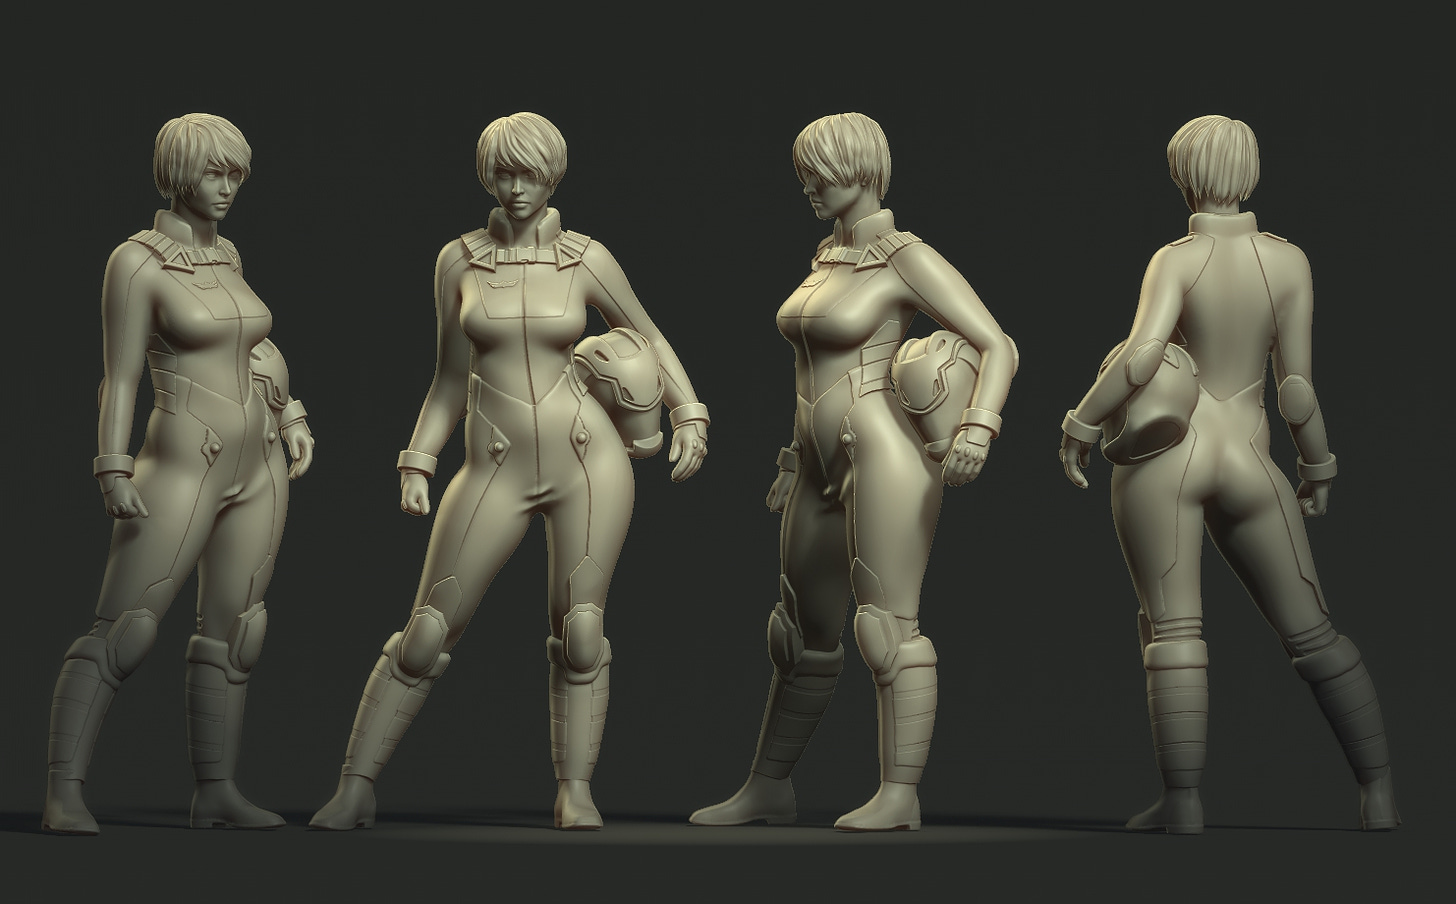 A 3D model in a basic color showing Theda from the front back and sides with her short hair and posed with her hips to the side while holding her helmet beneath her arm